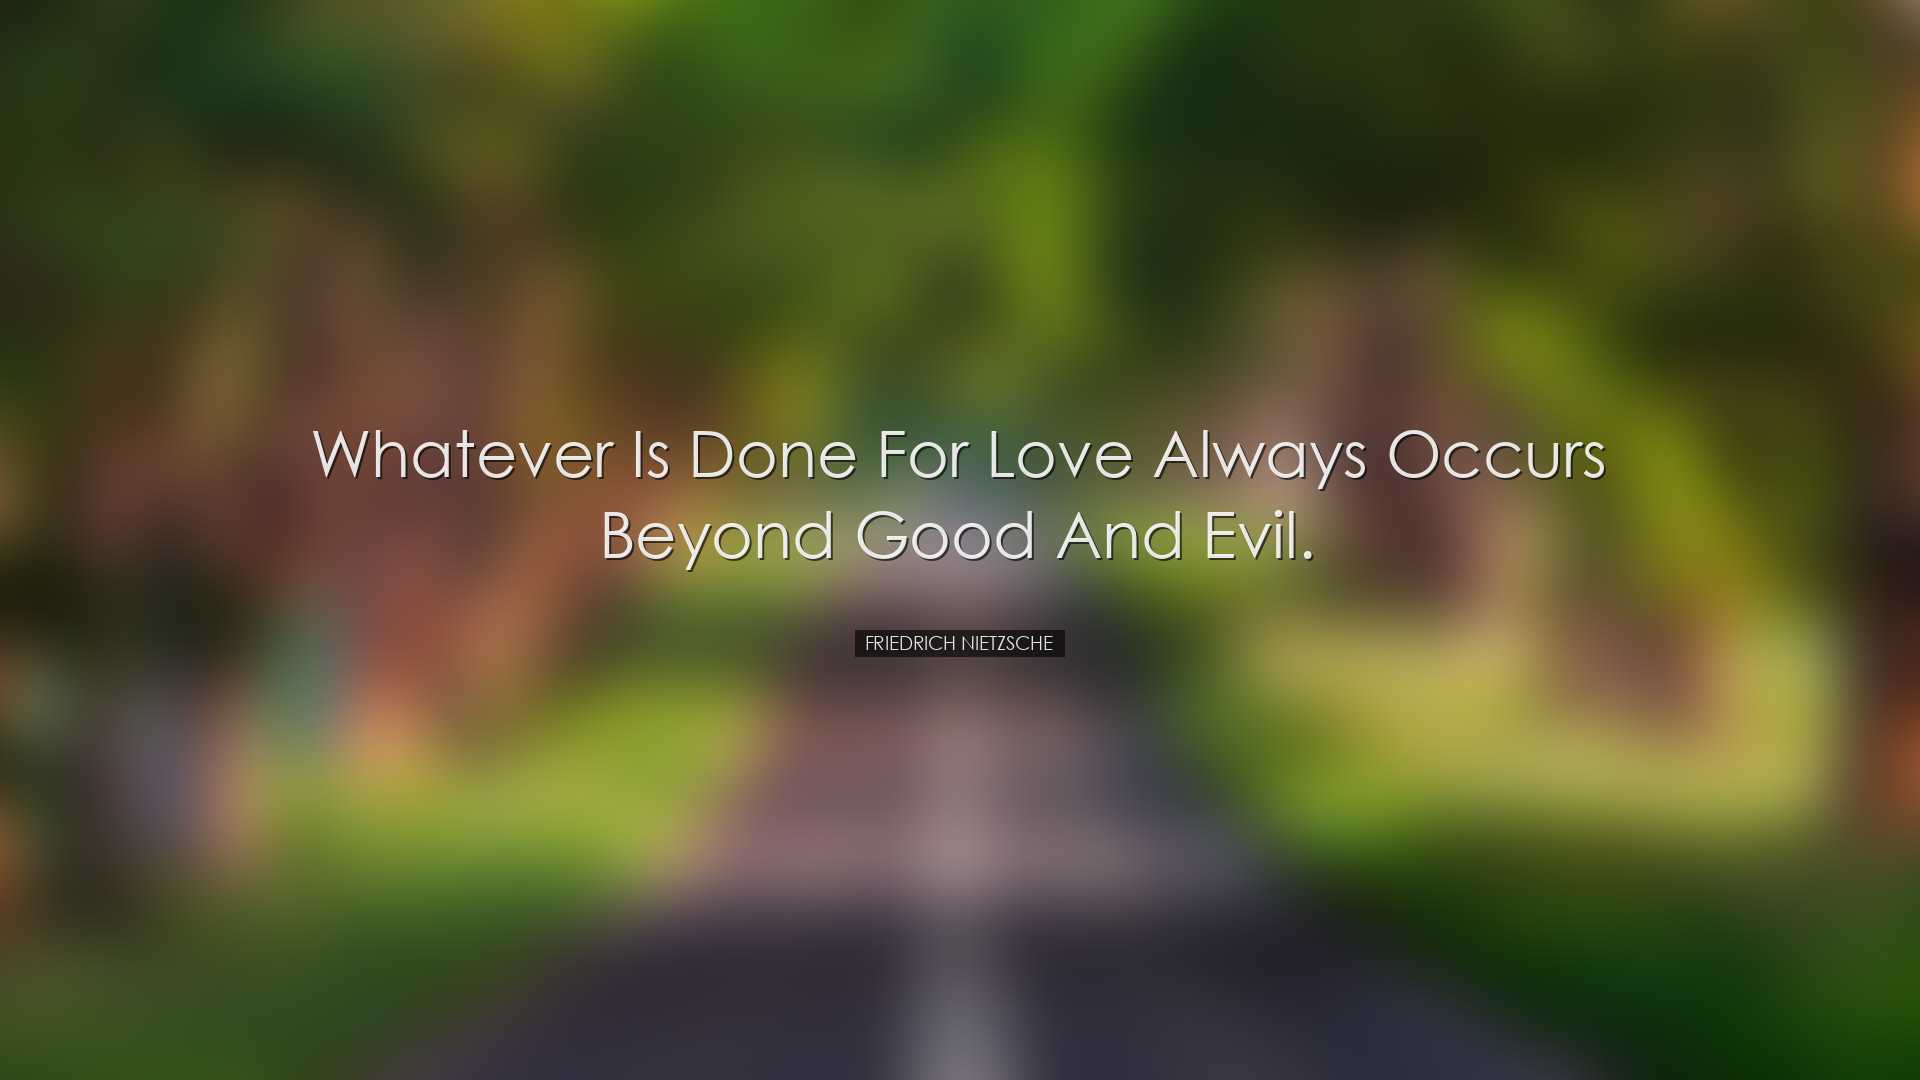 Whatever is done for love always occurs beyond good and evil. - Fr